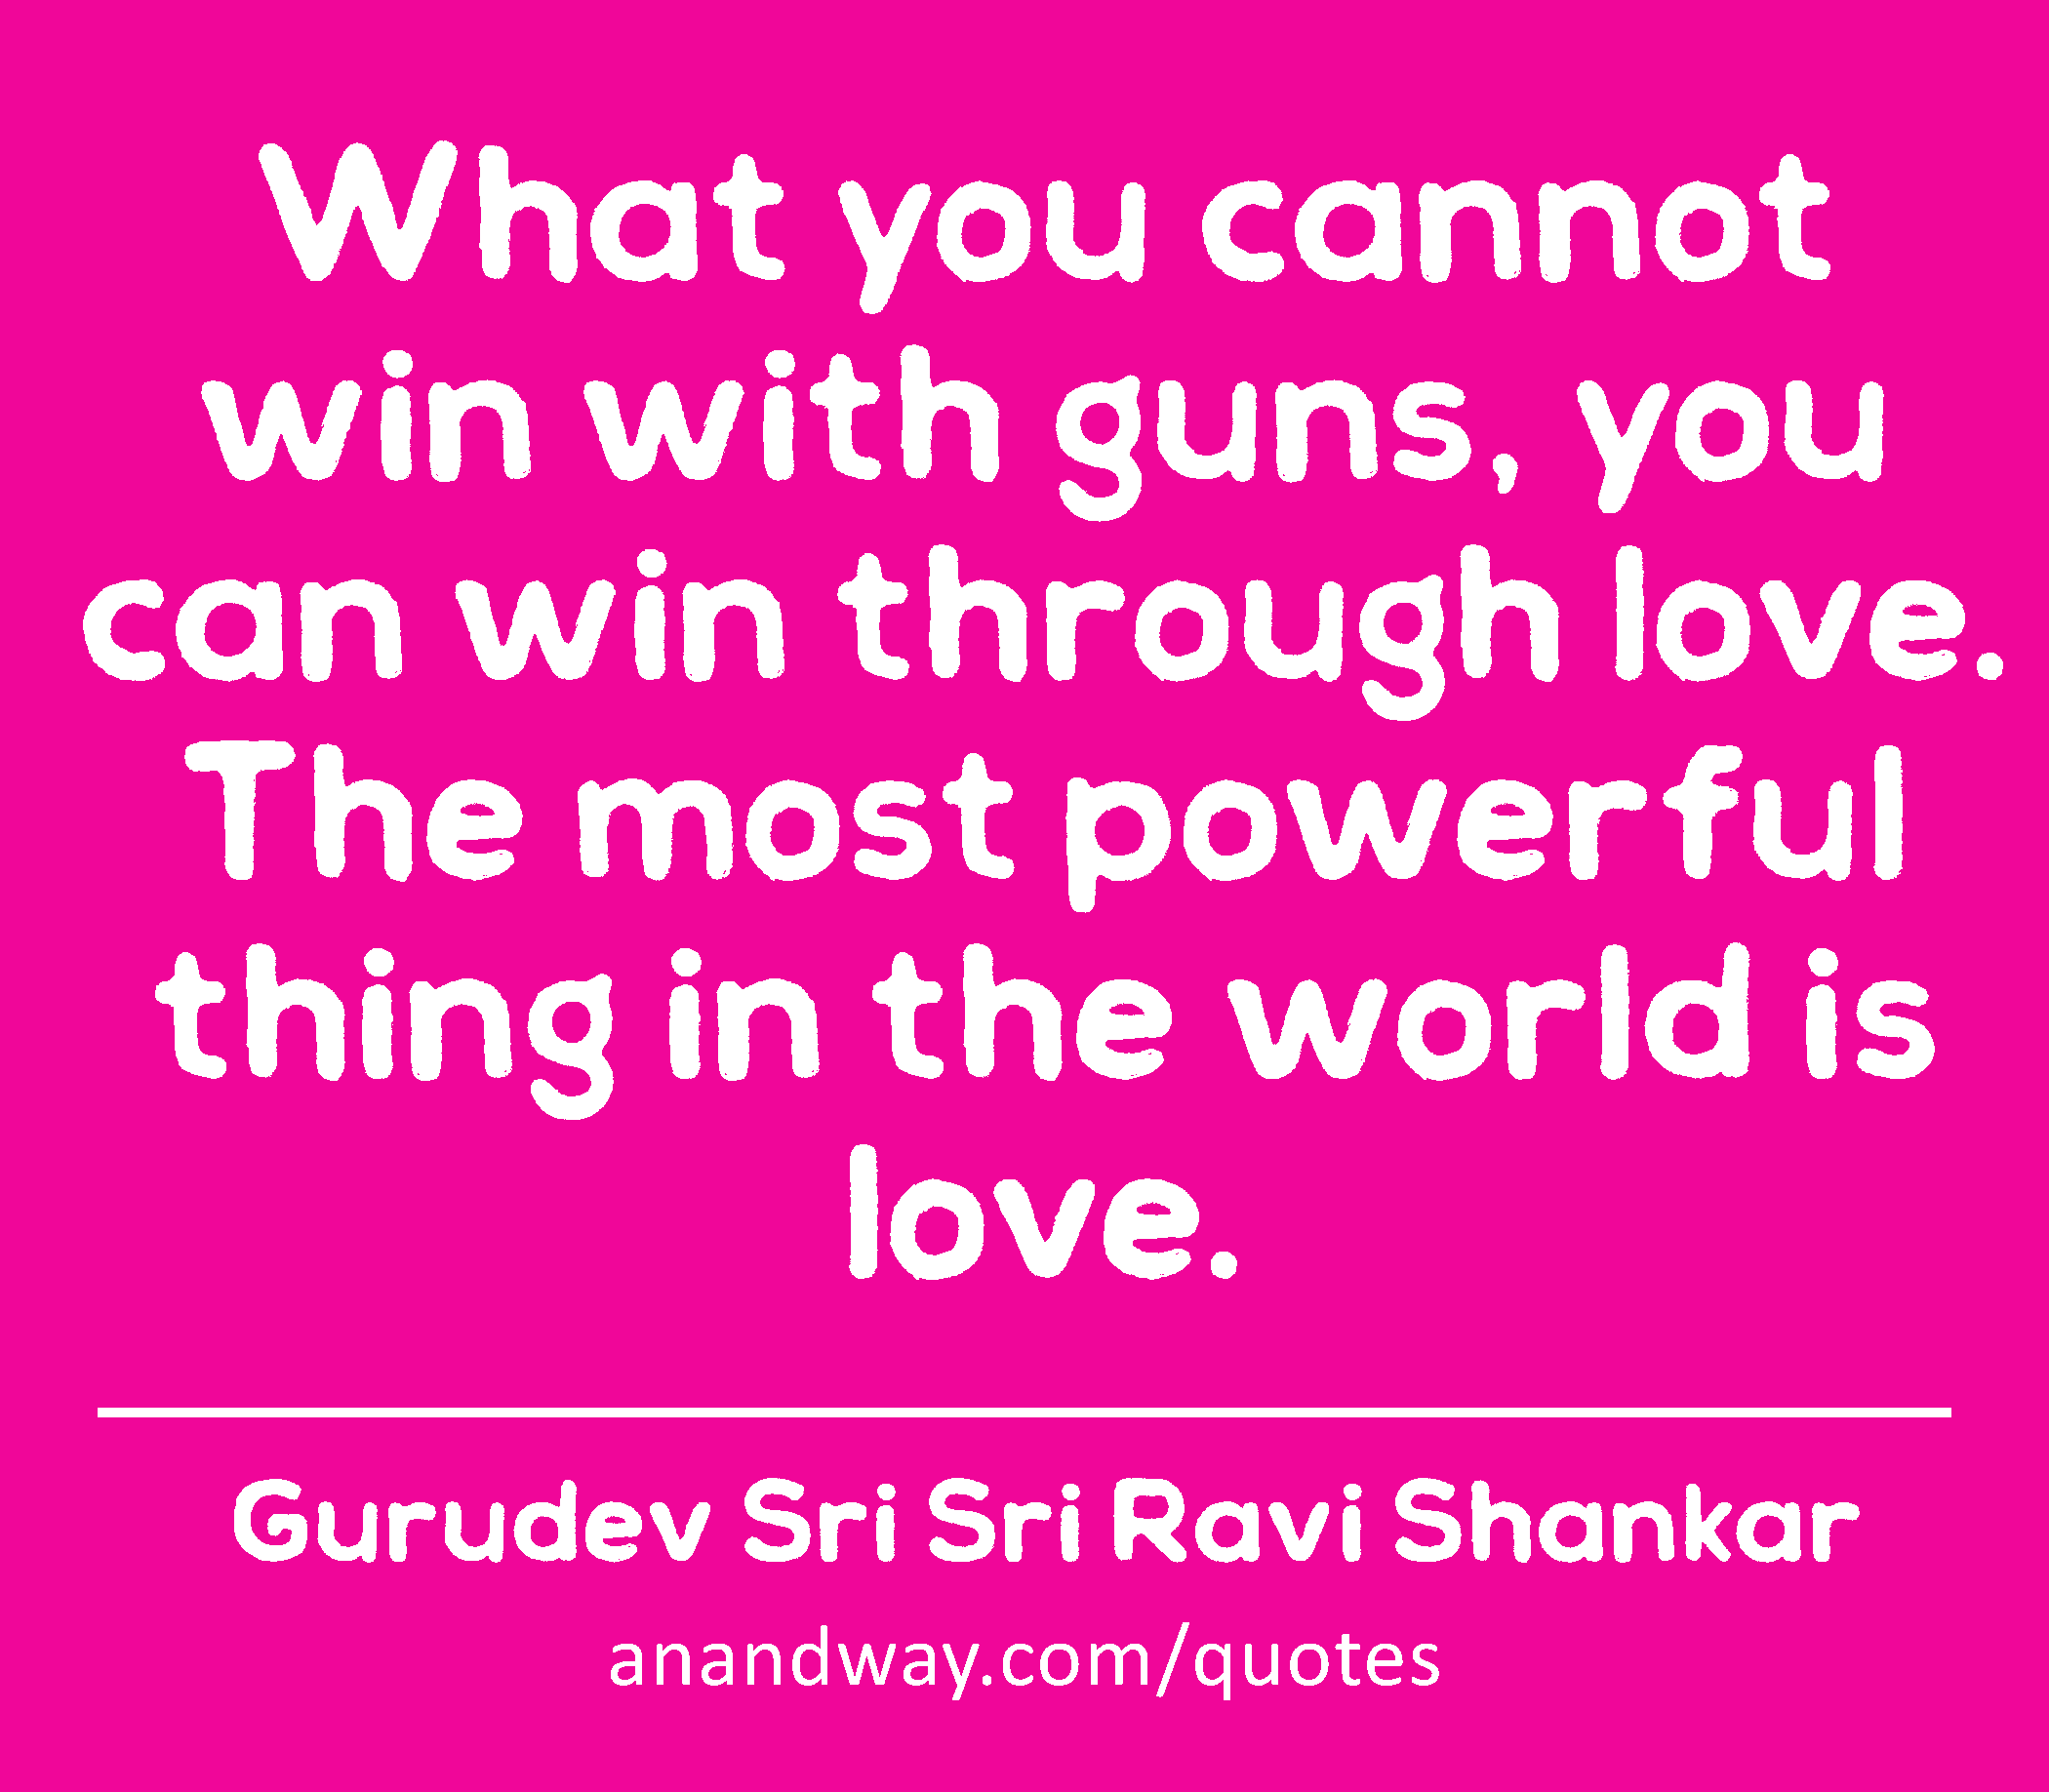 What you cannot win with guns, you can win through love. The most powerful thing in the world is
 -Gurudev Sri Sri Ravi Shankar